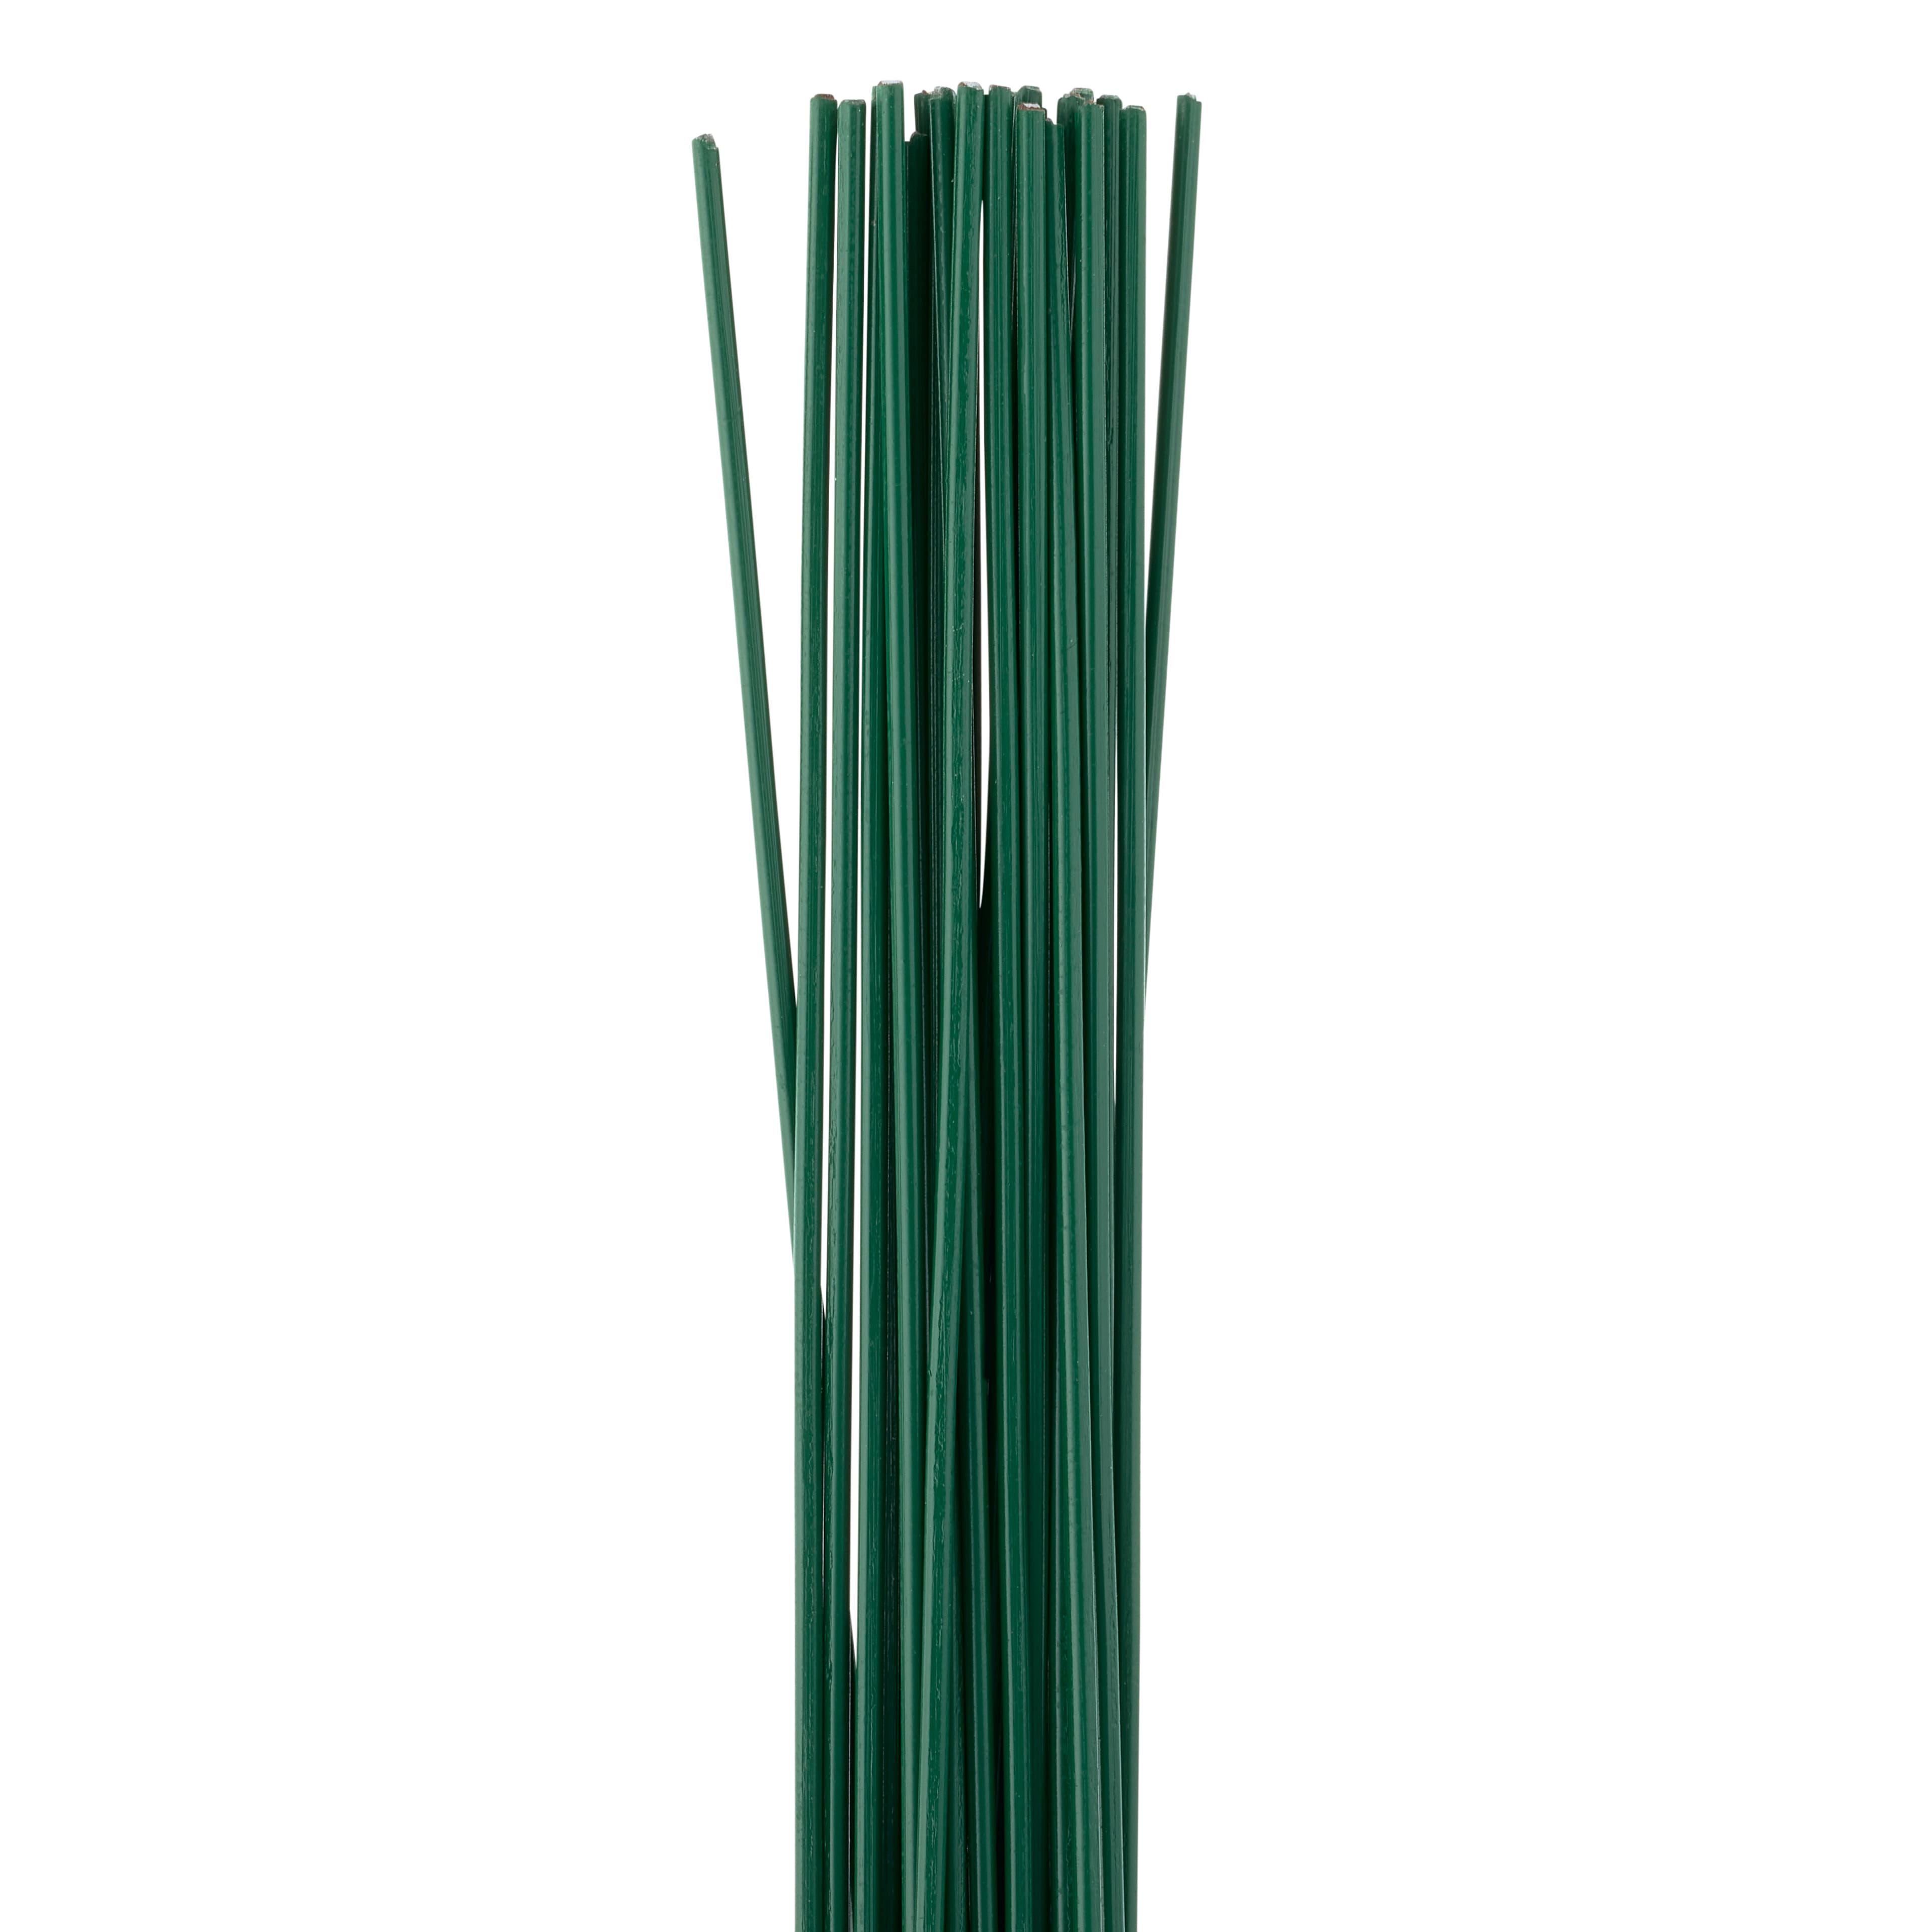 Darice Cloth Covered Stem Wire 20 Gauge 18 Inches Green 